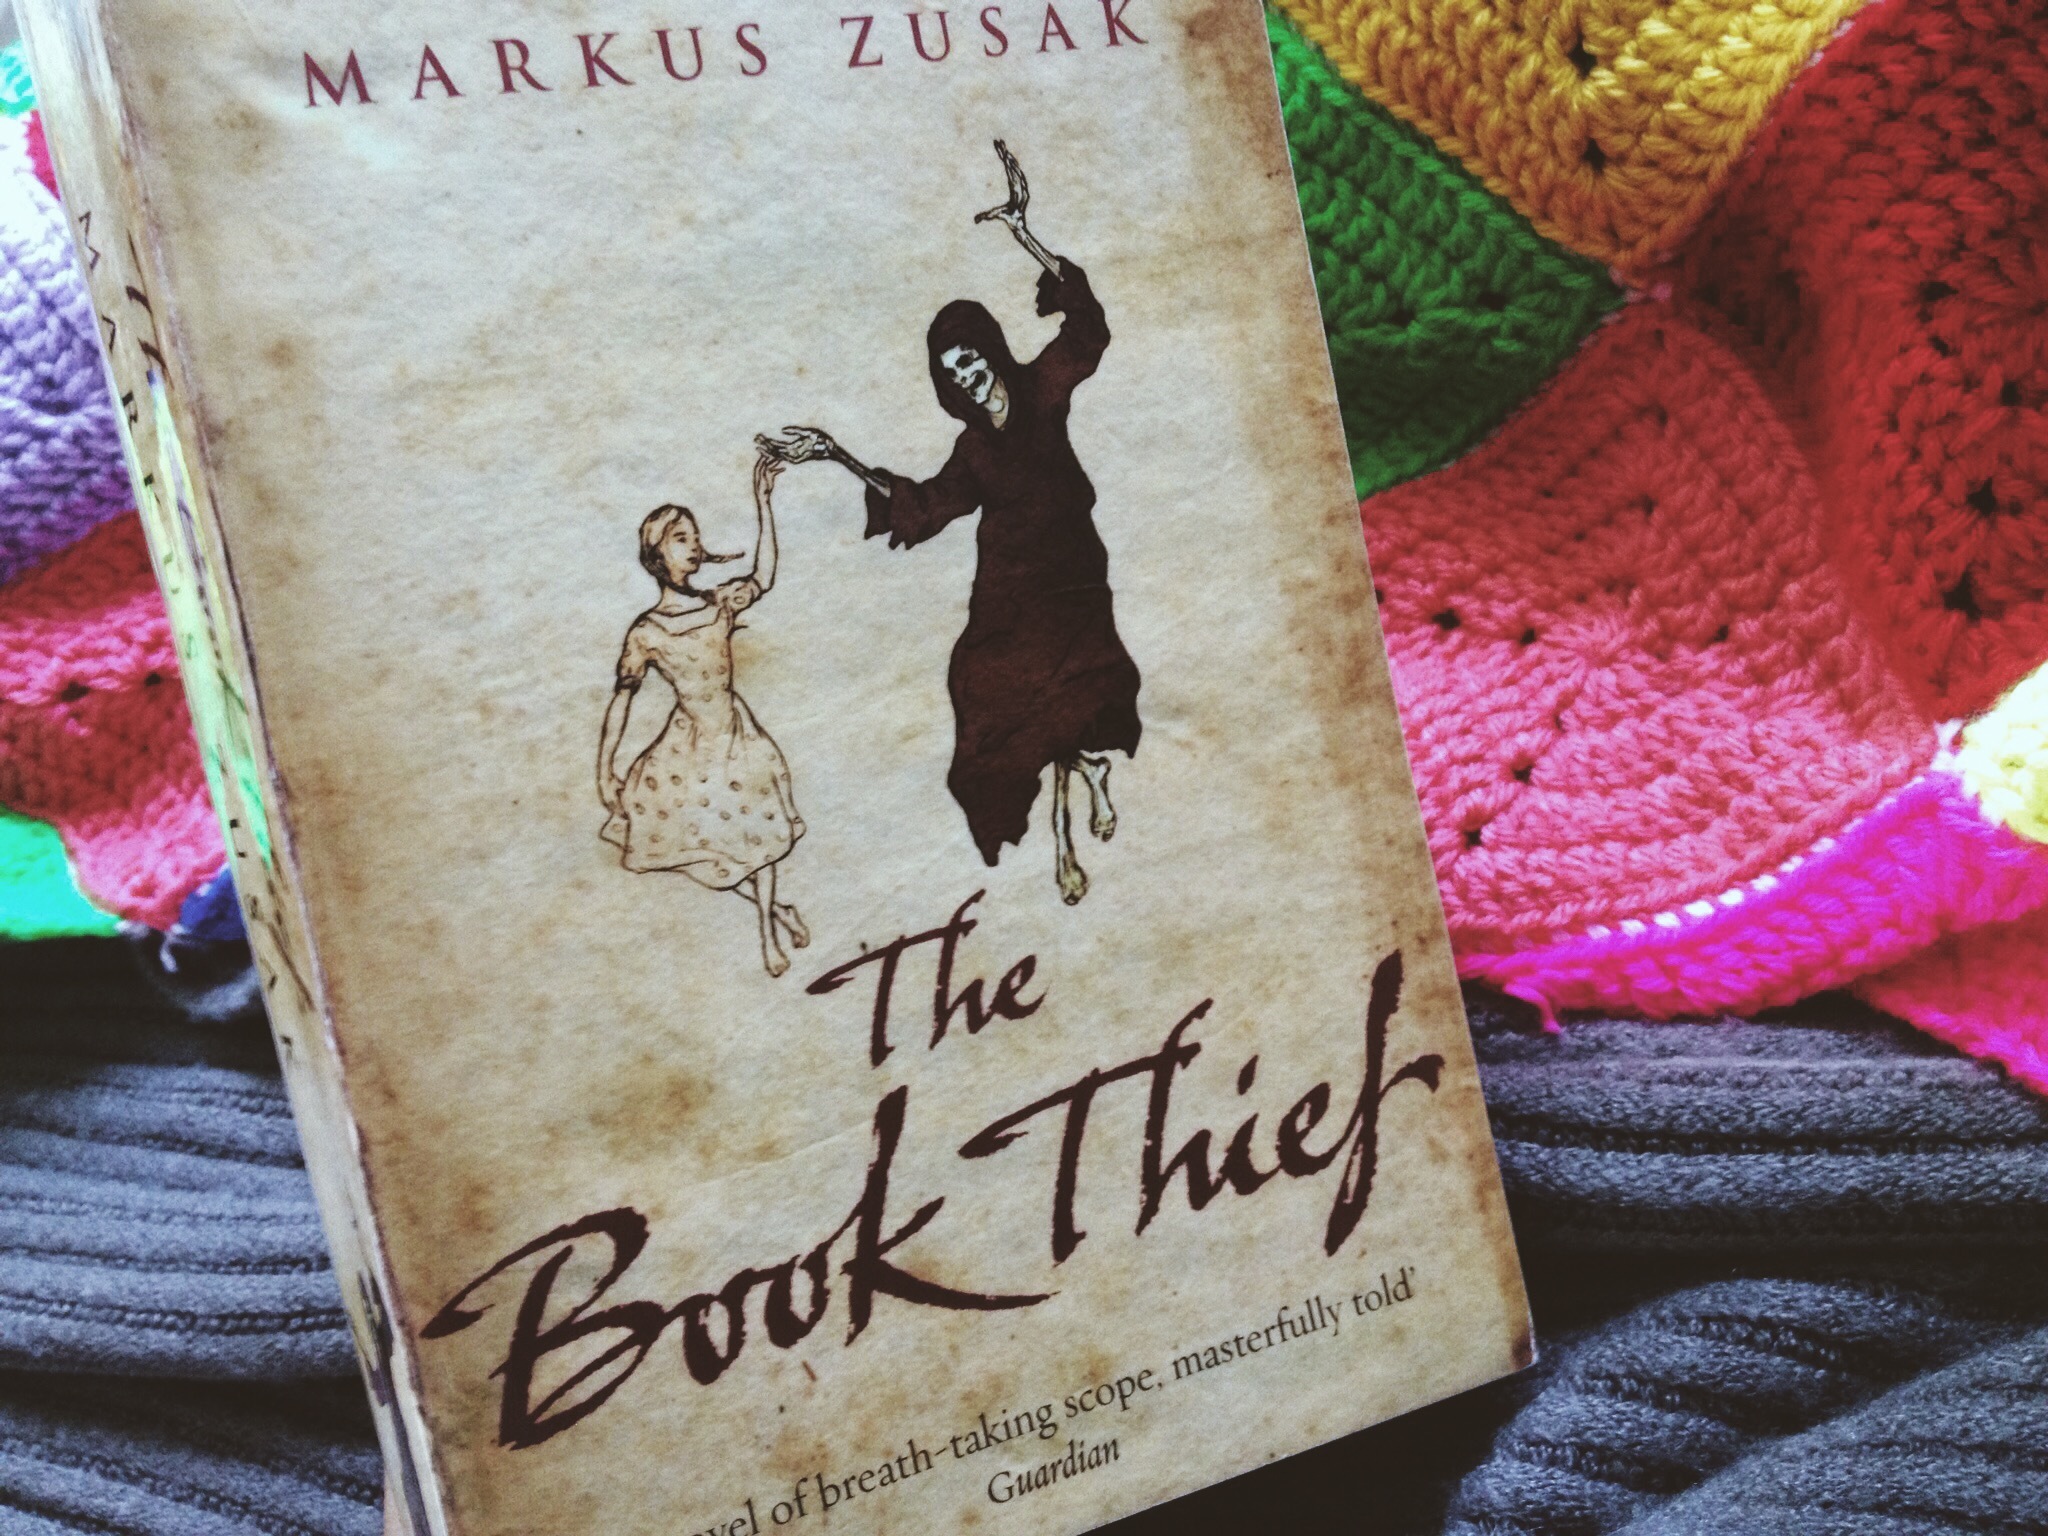 Bookish Photo Shoot #2: The Book Thief – The Last Reader